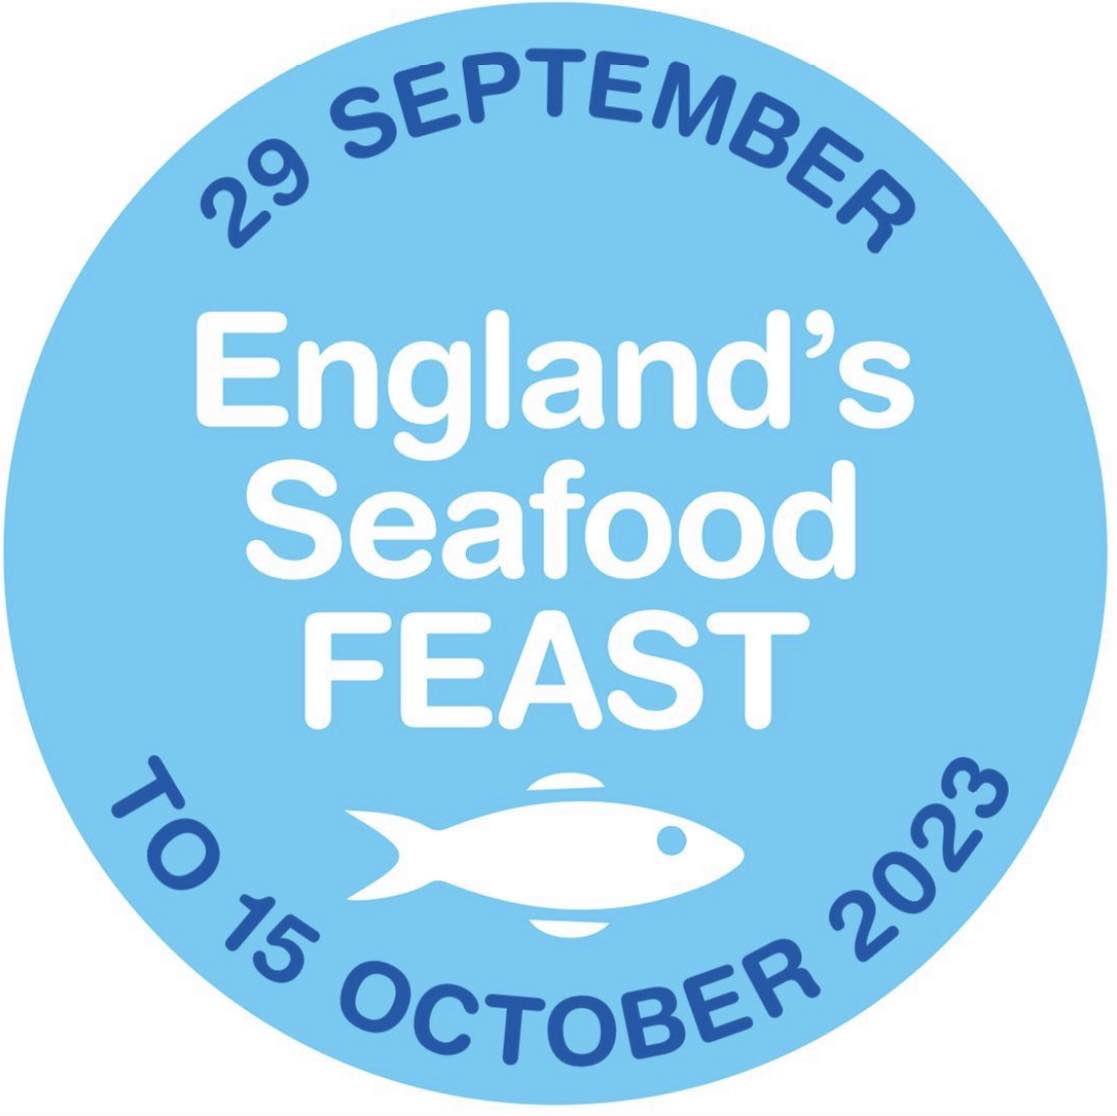 England's Seafood Feast starts this Saturday!
Enjoy the best of England's seafood across the English Riviera until 15th October - find out more bit.ly/4675ejc
@EnglishRiviera